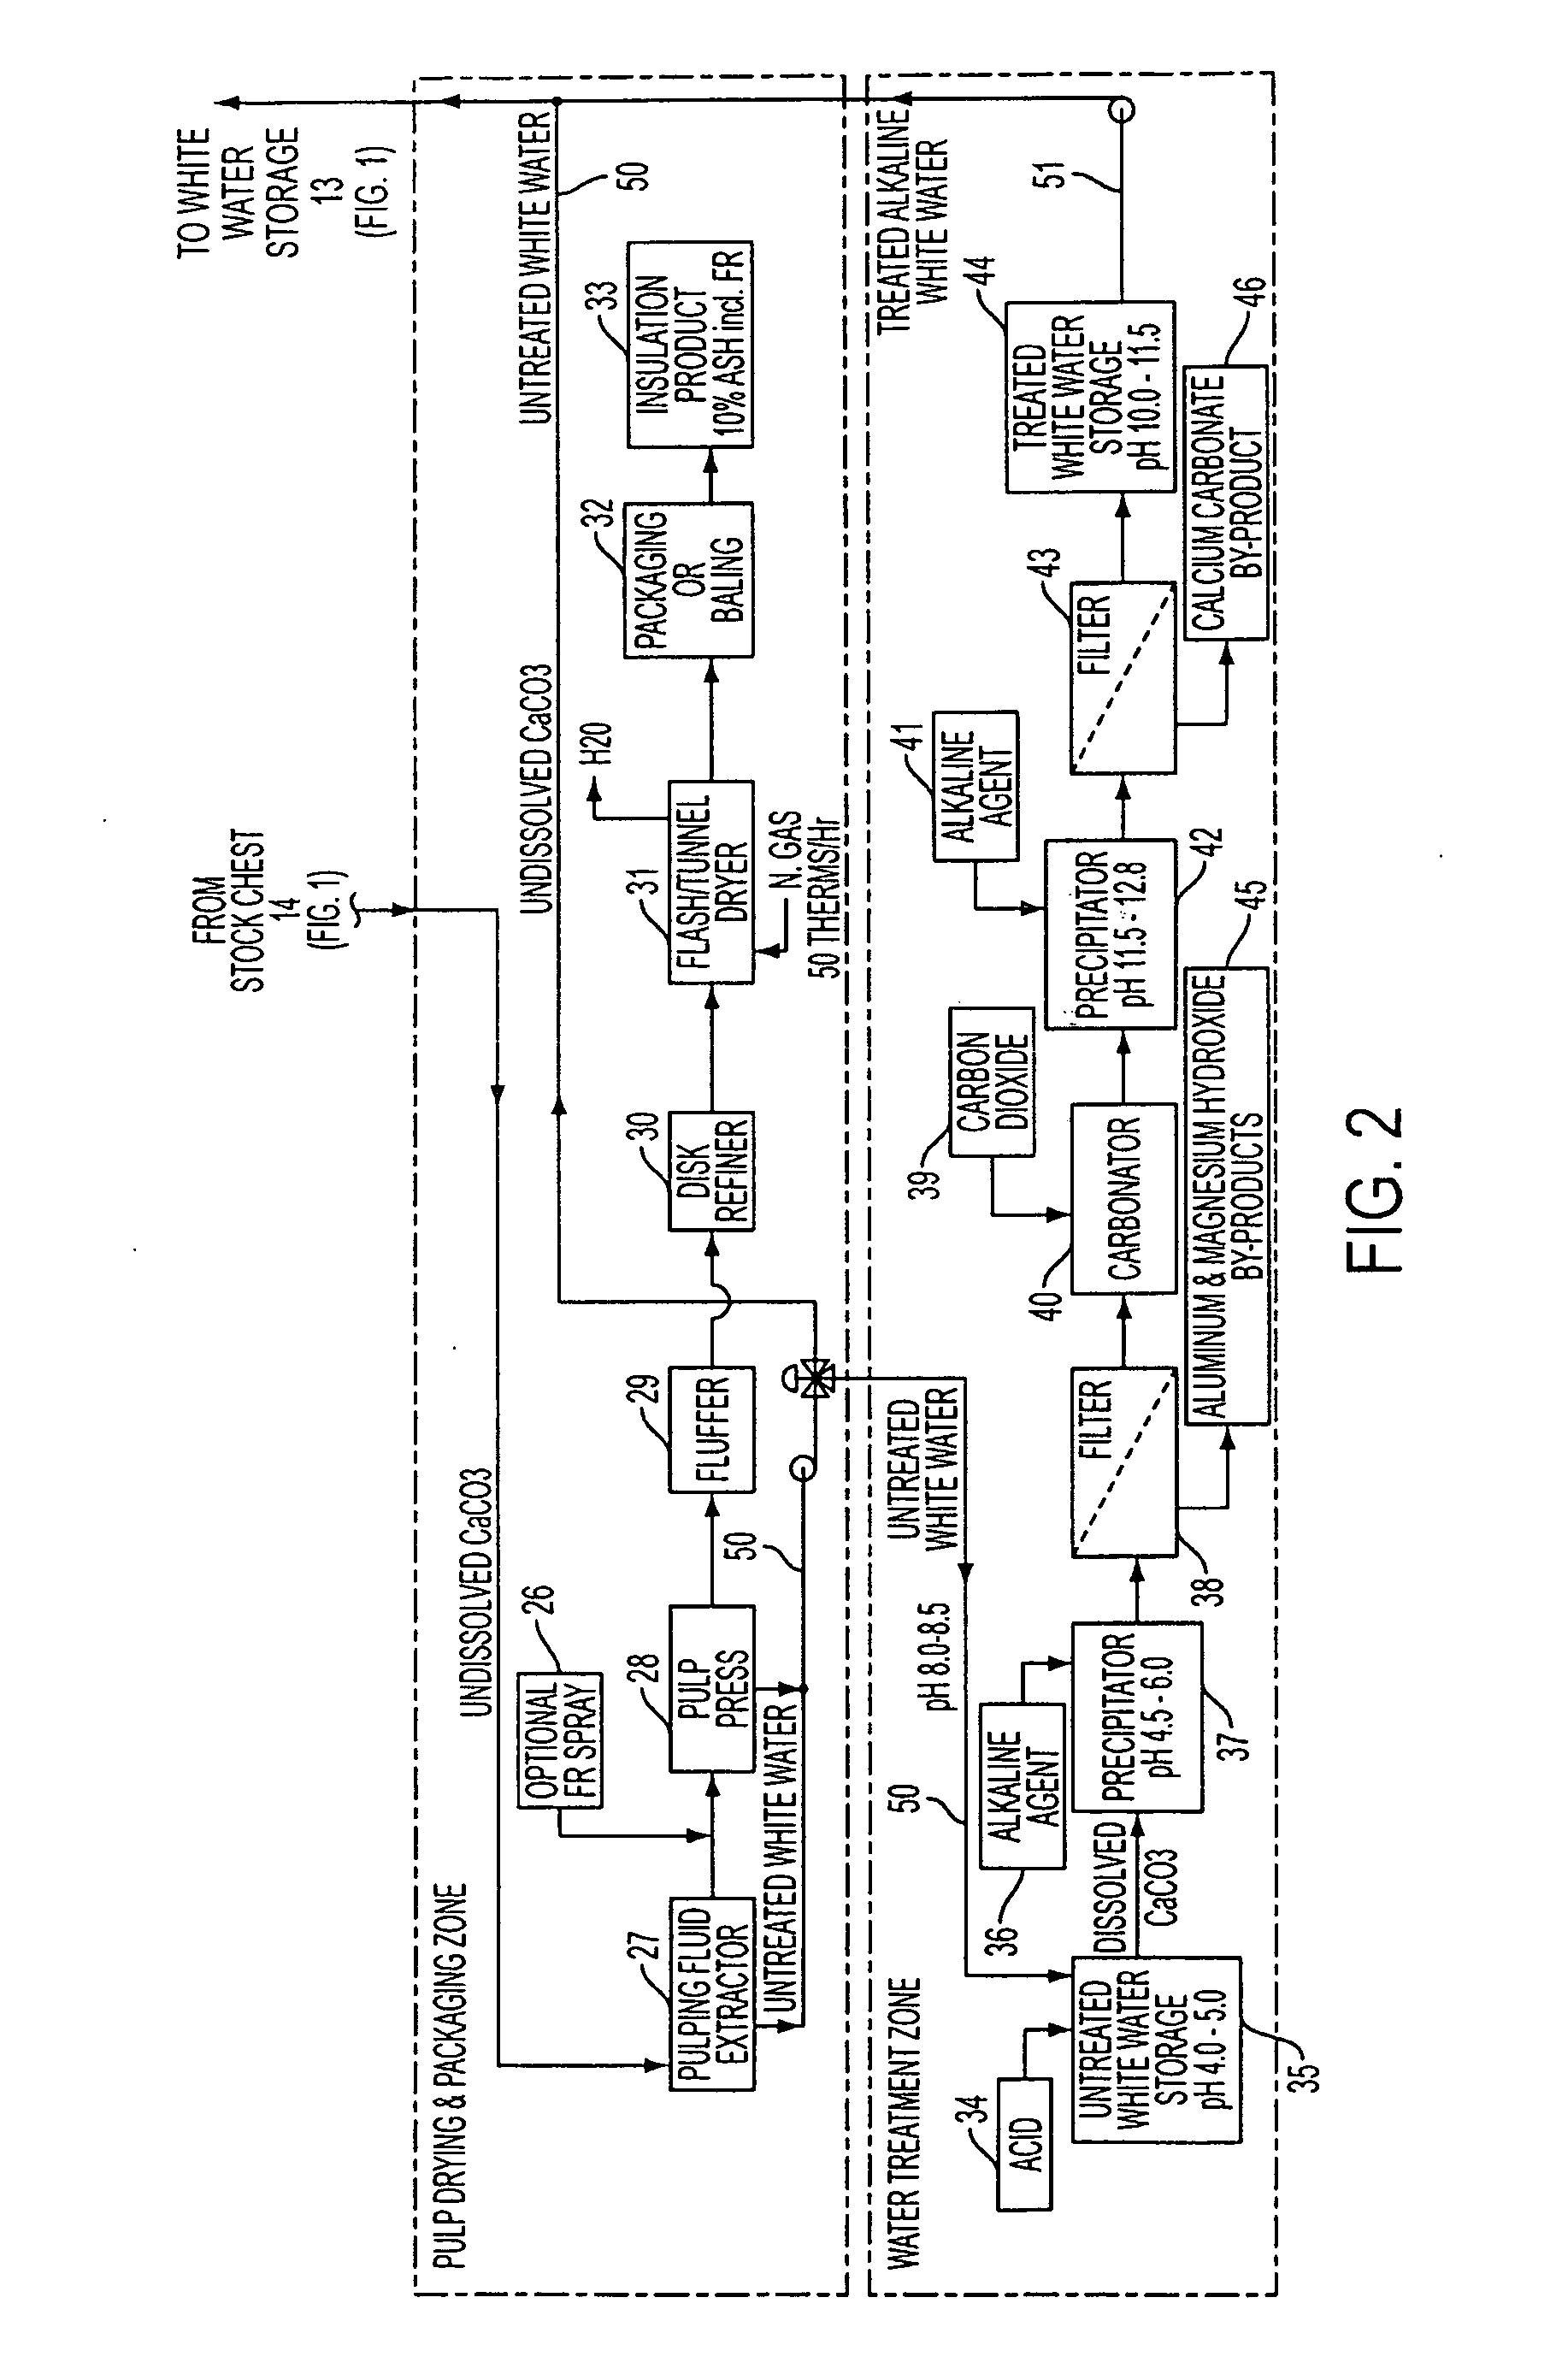 Wet pulping system and method for producing cellulosic insulation with low ash content